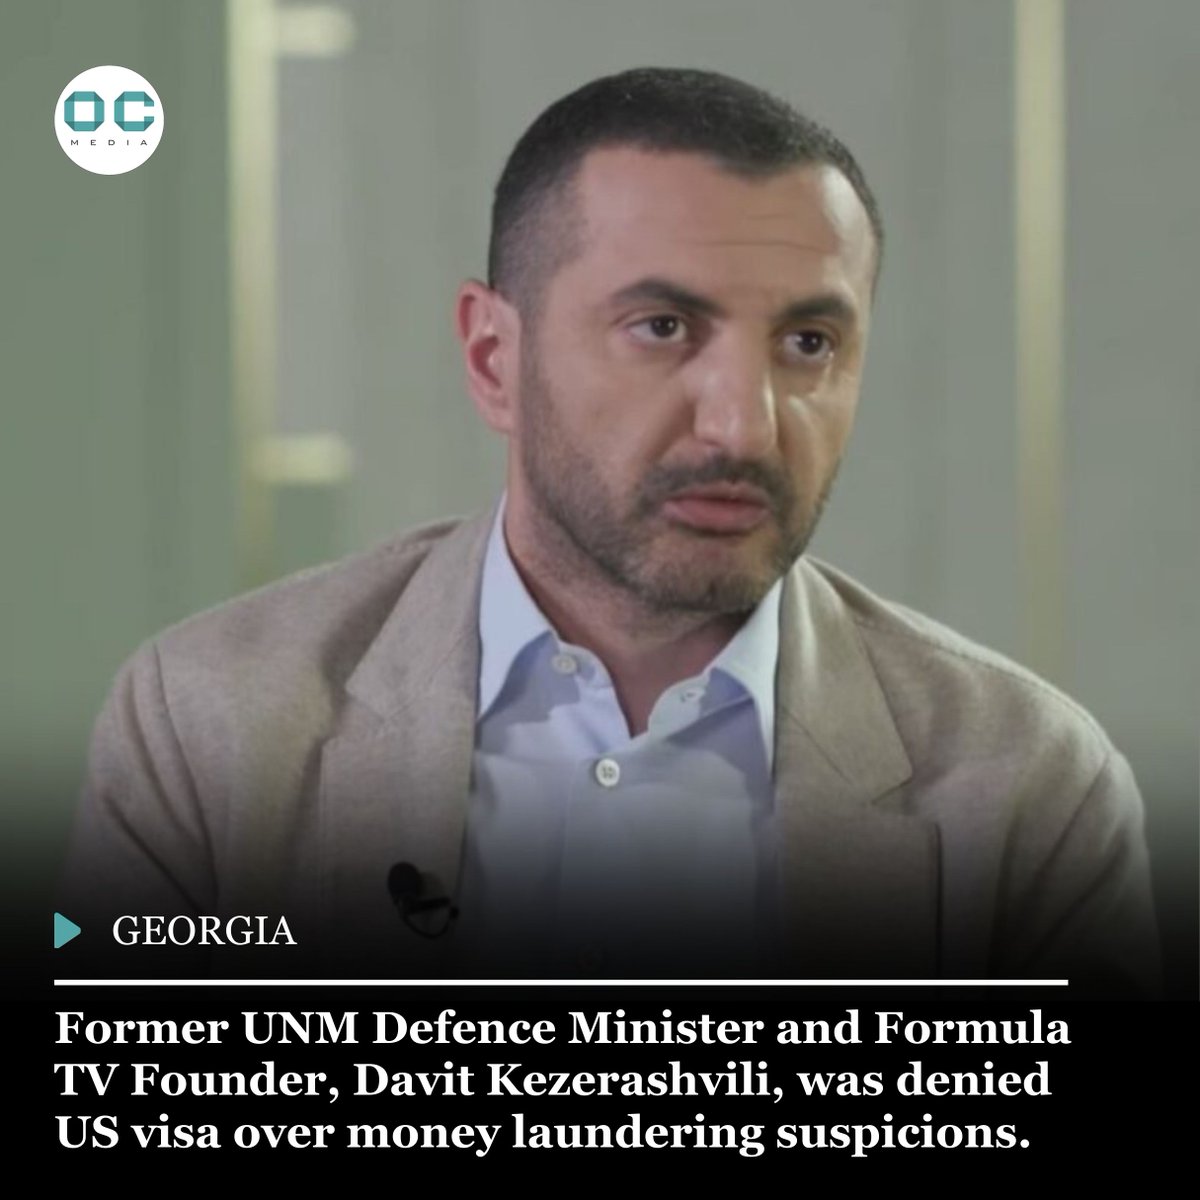 Davit Kezerashvili, a former UNM Defence Minister and the founder of Formula TV, was denied a visa to the US. RFE/RL reported on Tuesday that he was denied the visa on suspicion of involvement in money laundering. Read more about Kezerashvili: oc-media.org/tag/davit-keze…